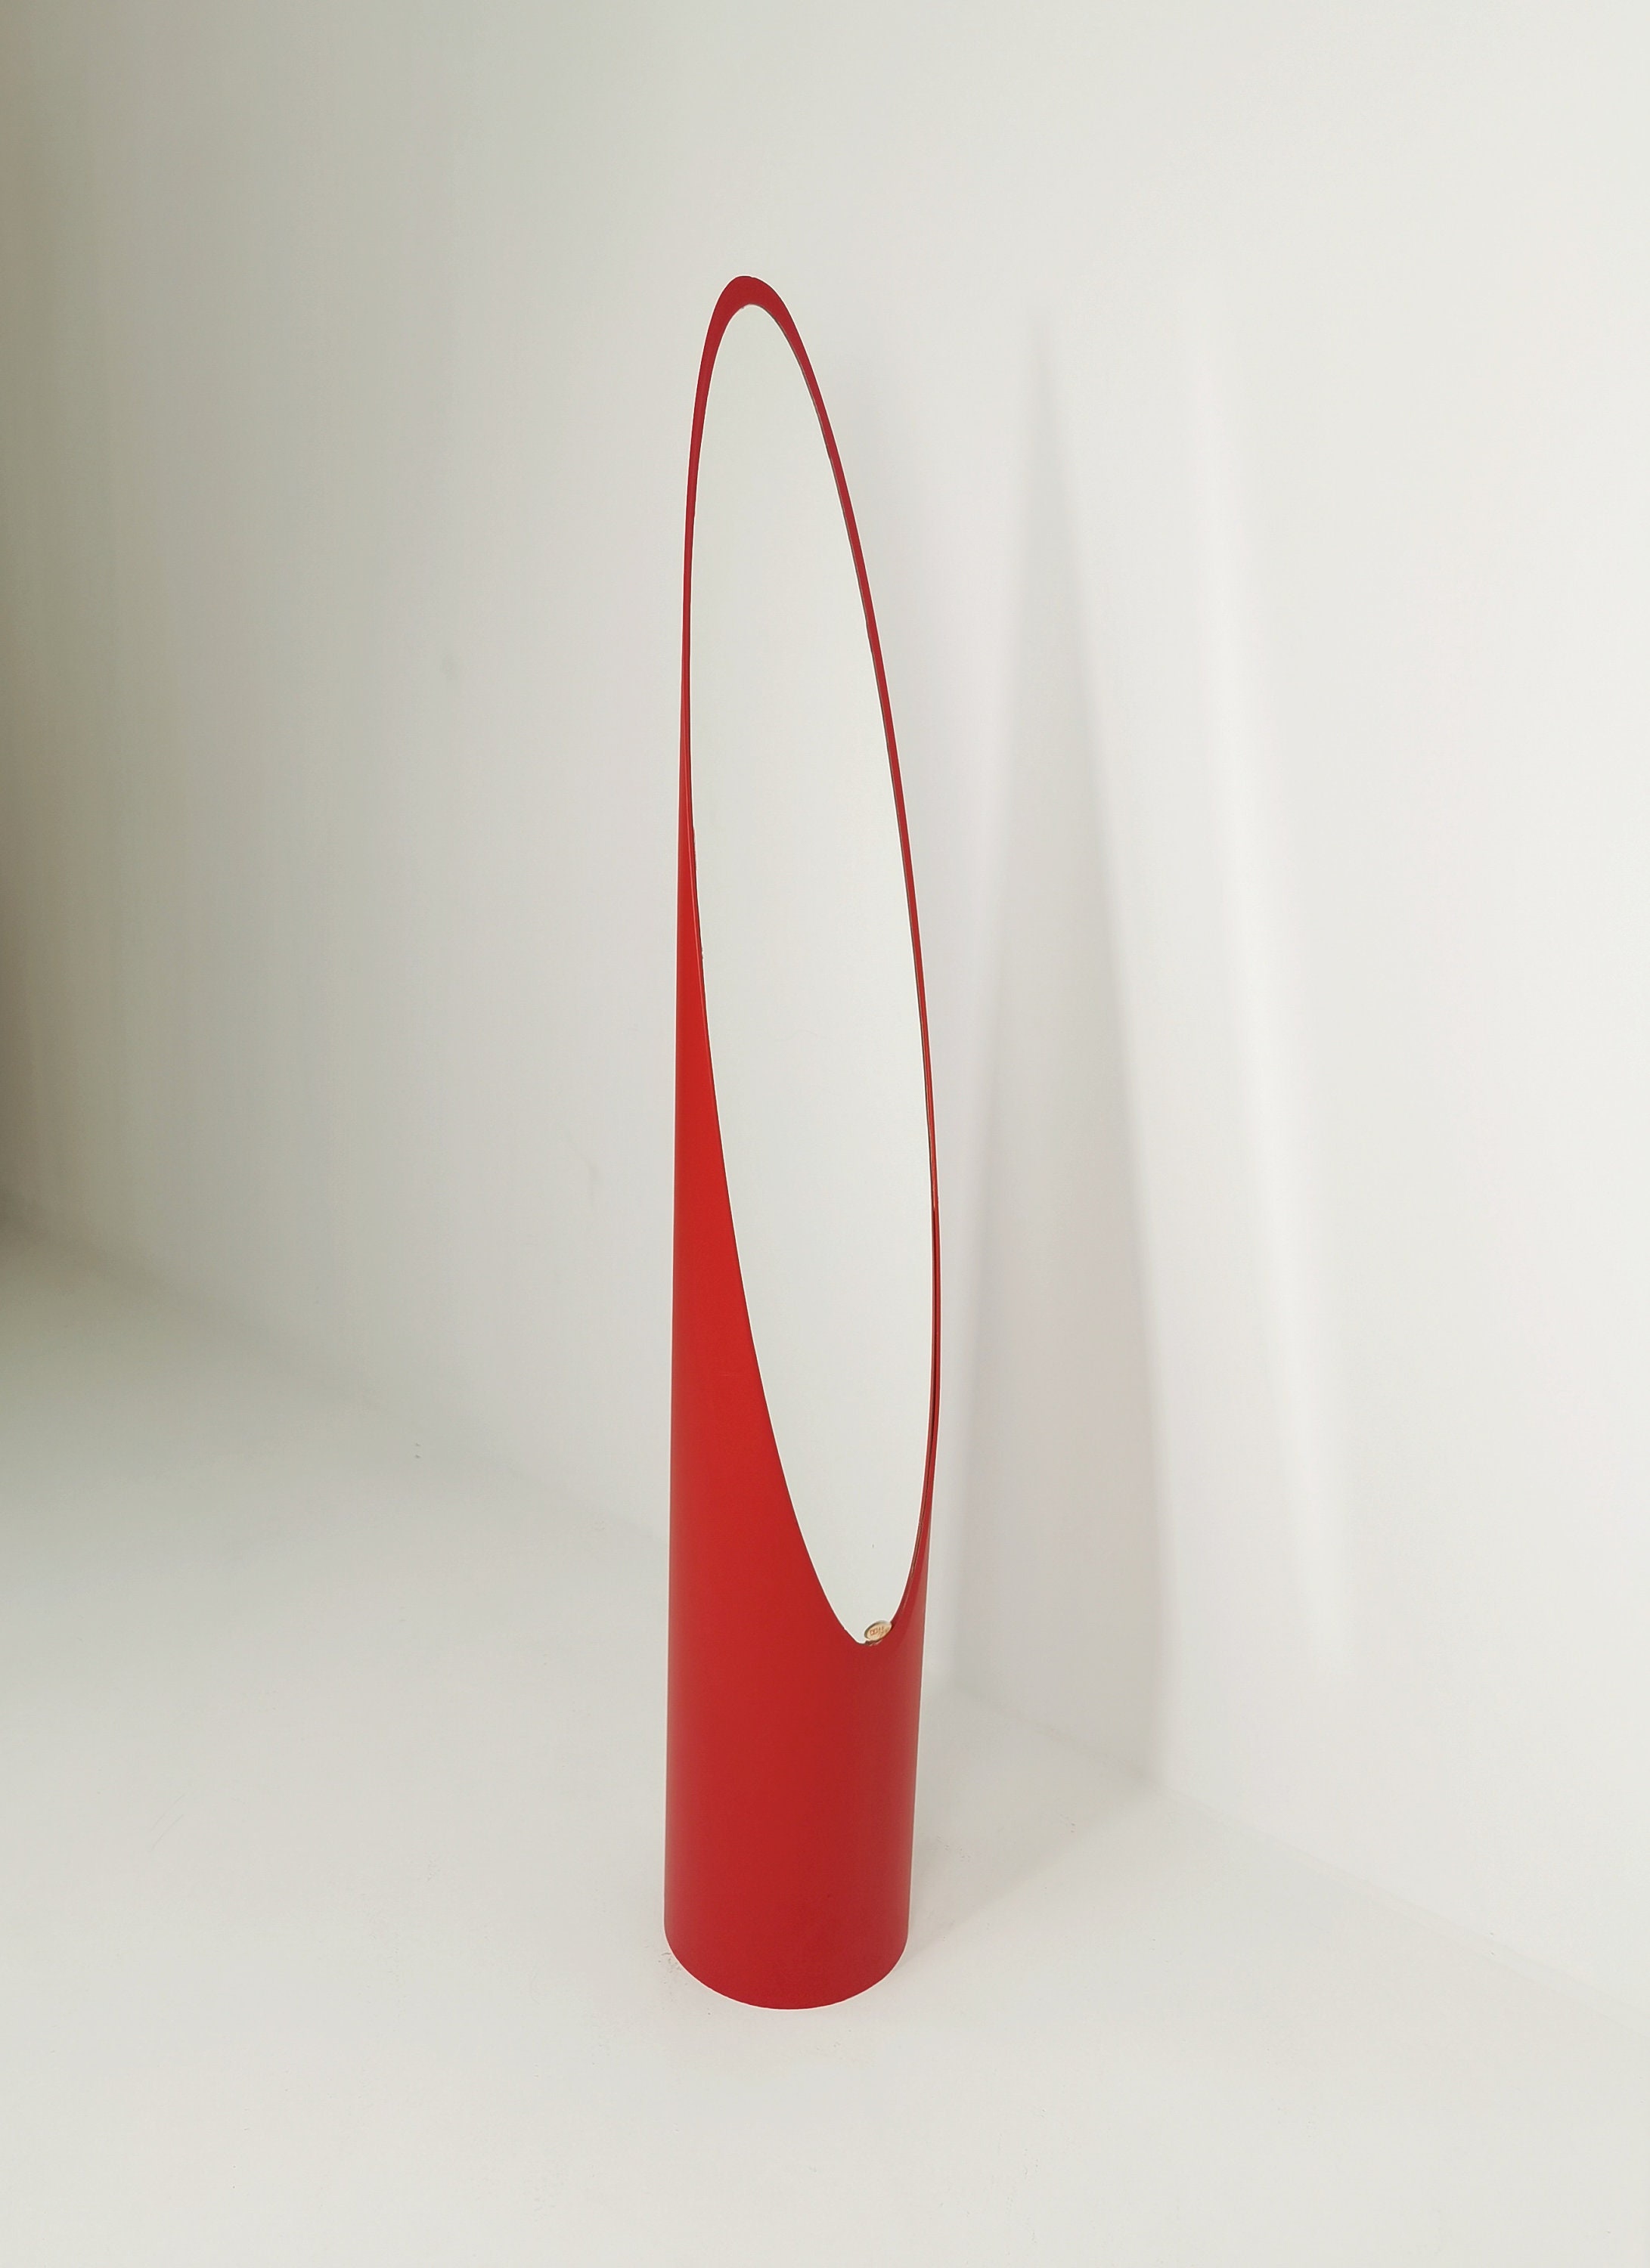 Mid-Century Modern Italian Red Plastic Mirror, 1980s for sale at